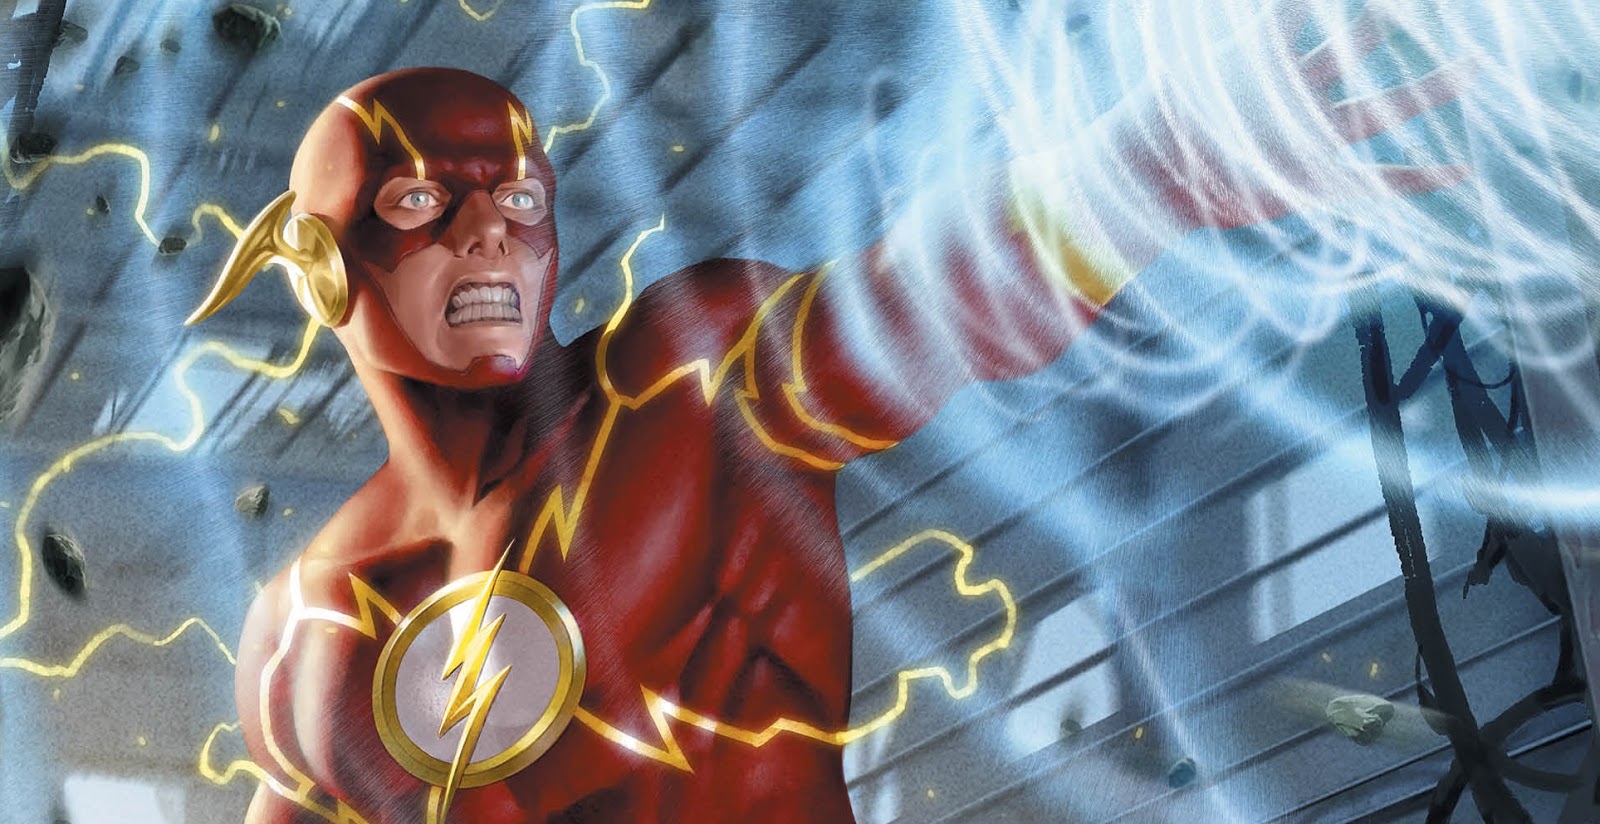 The Flash Dc 2020 Movie Art Wallpapers